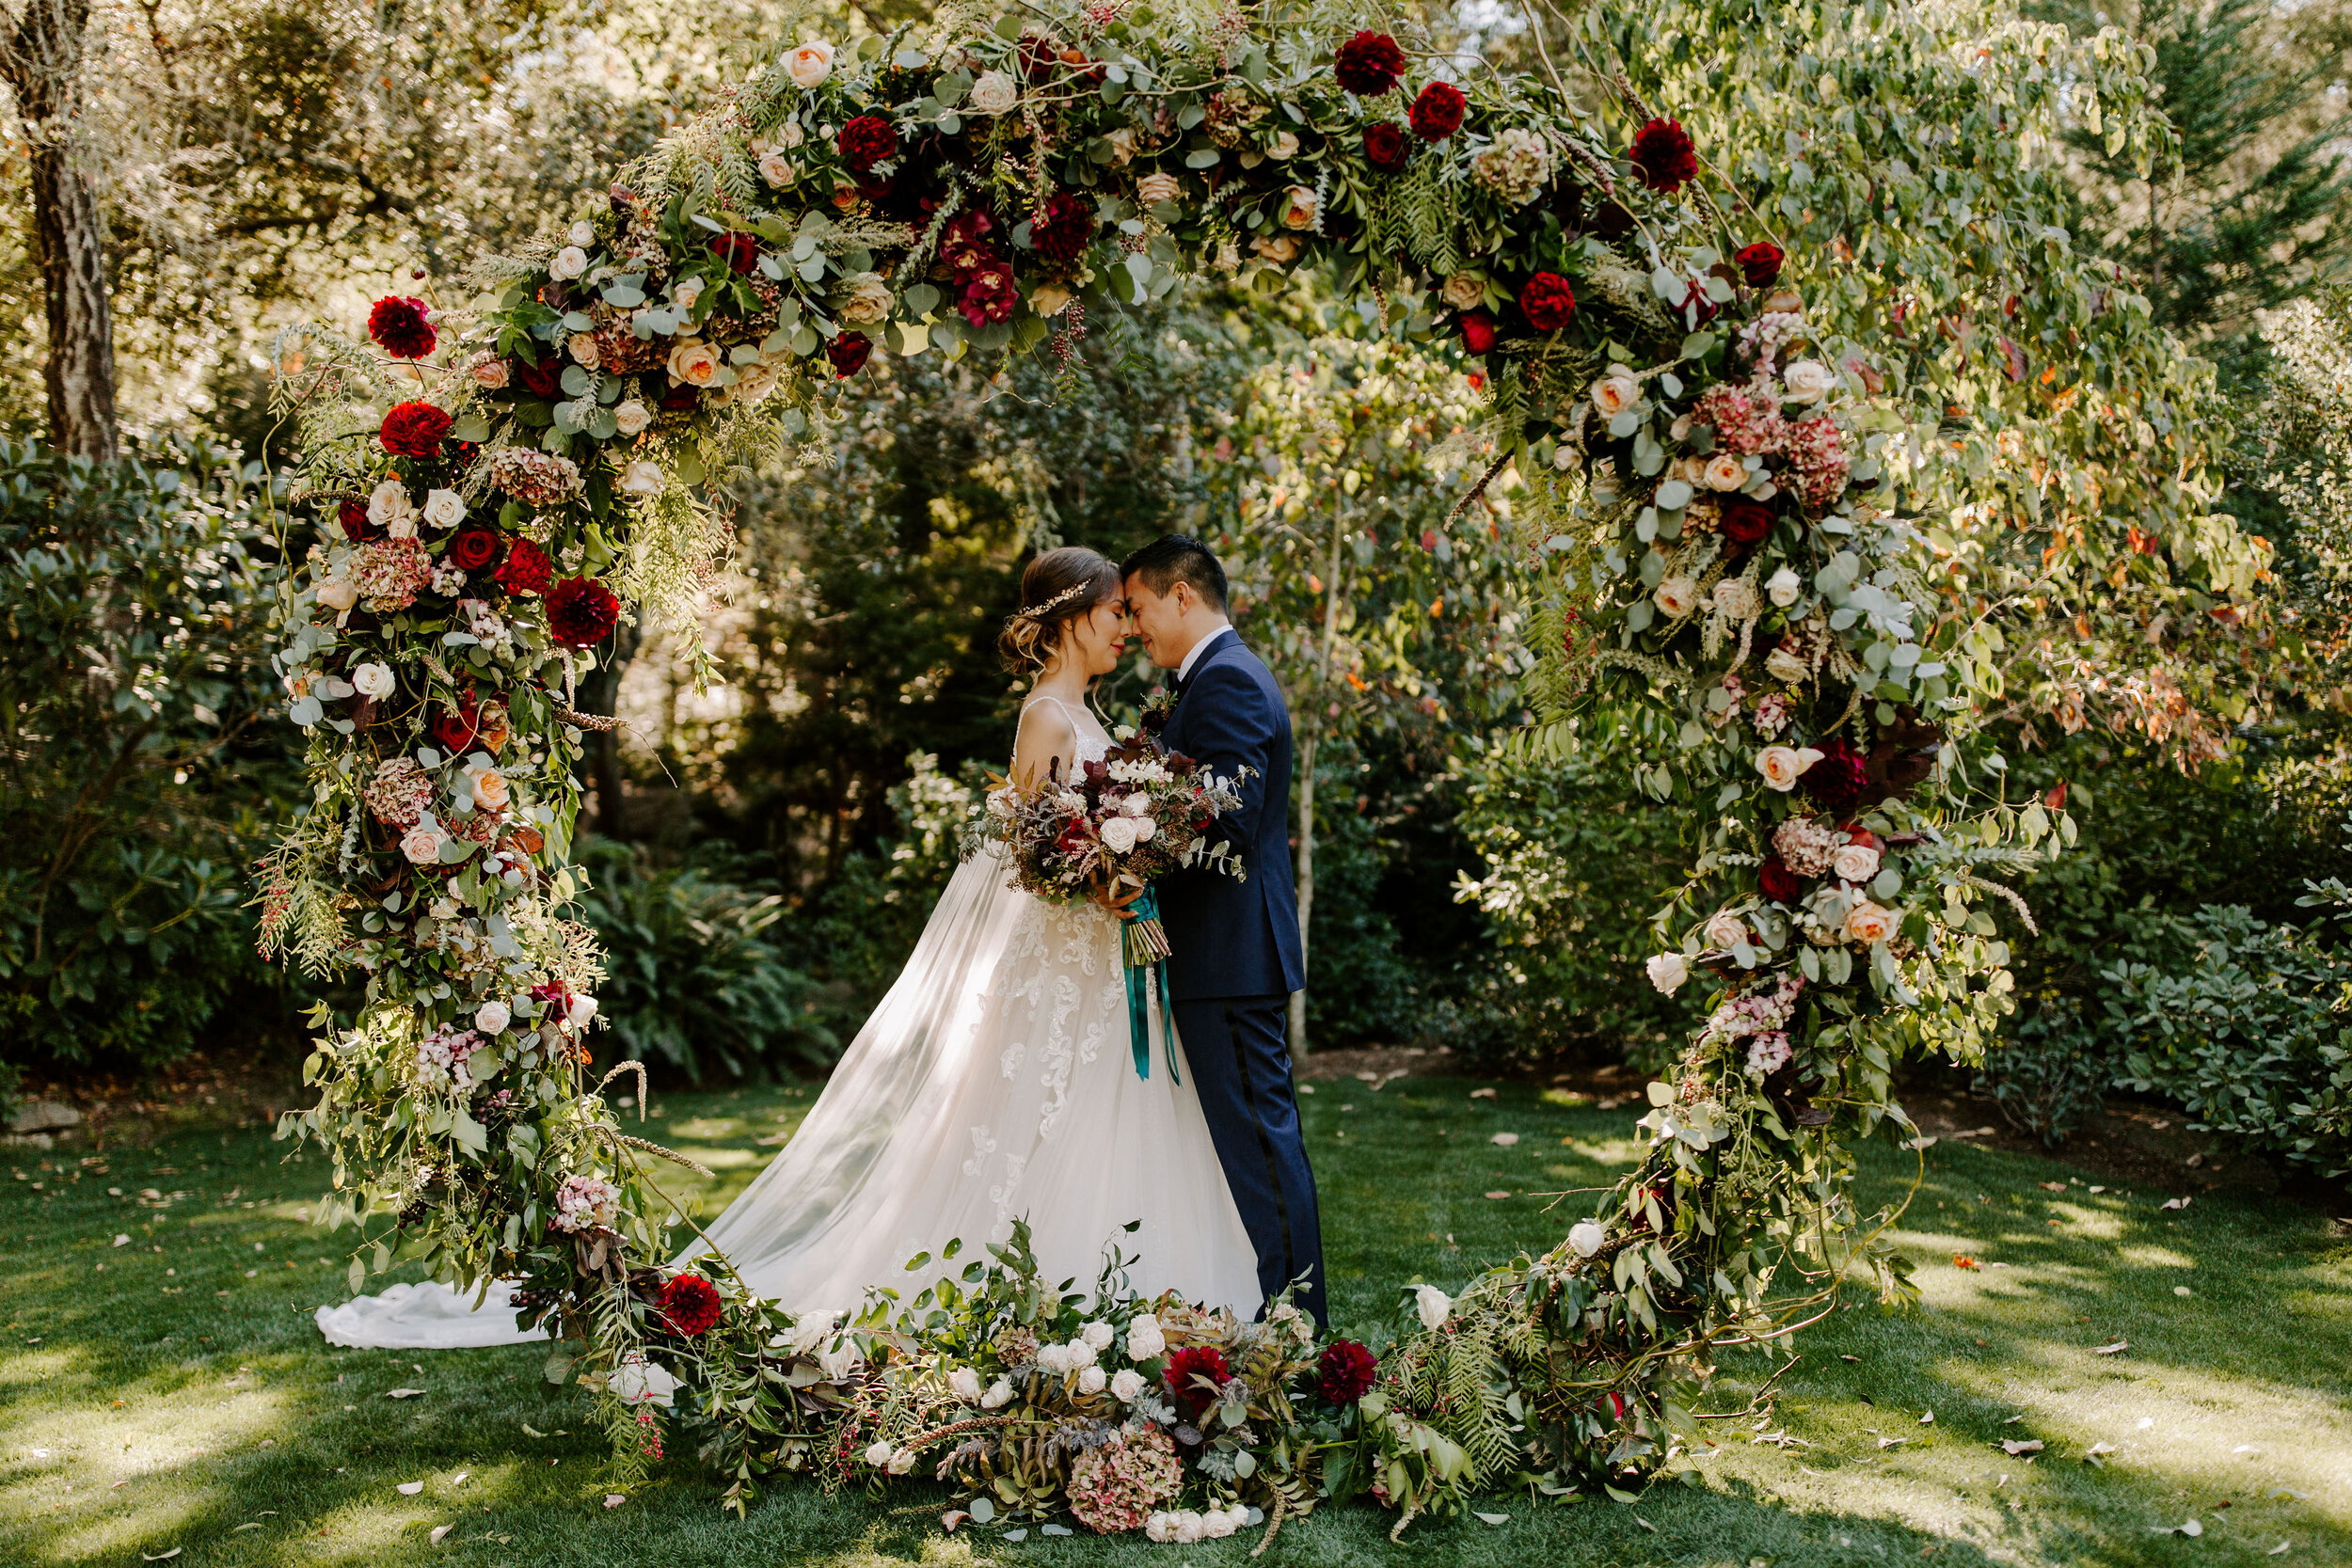 Fall Wedding Altar Ideas Featured in Town & Country Magazine2.jpg